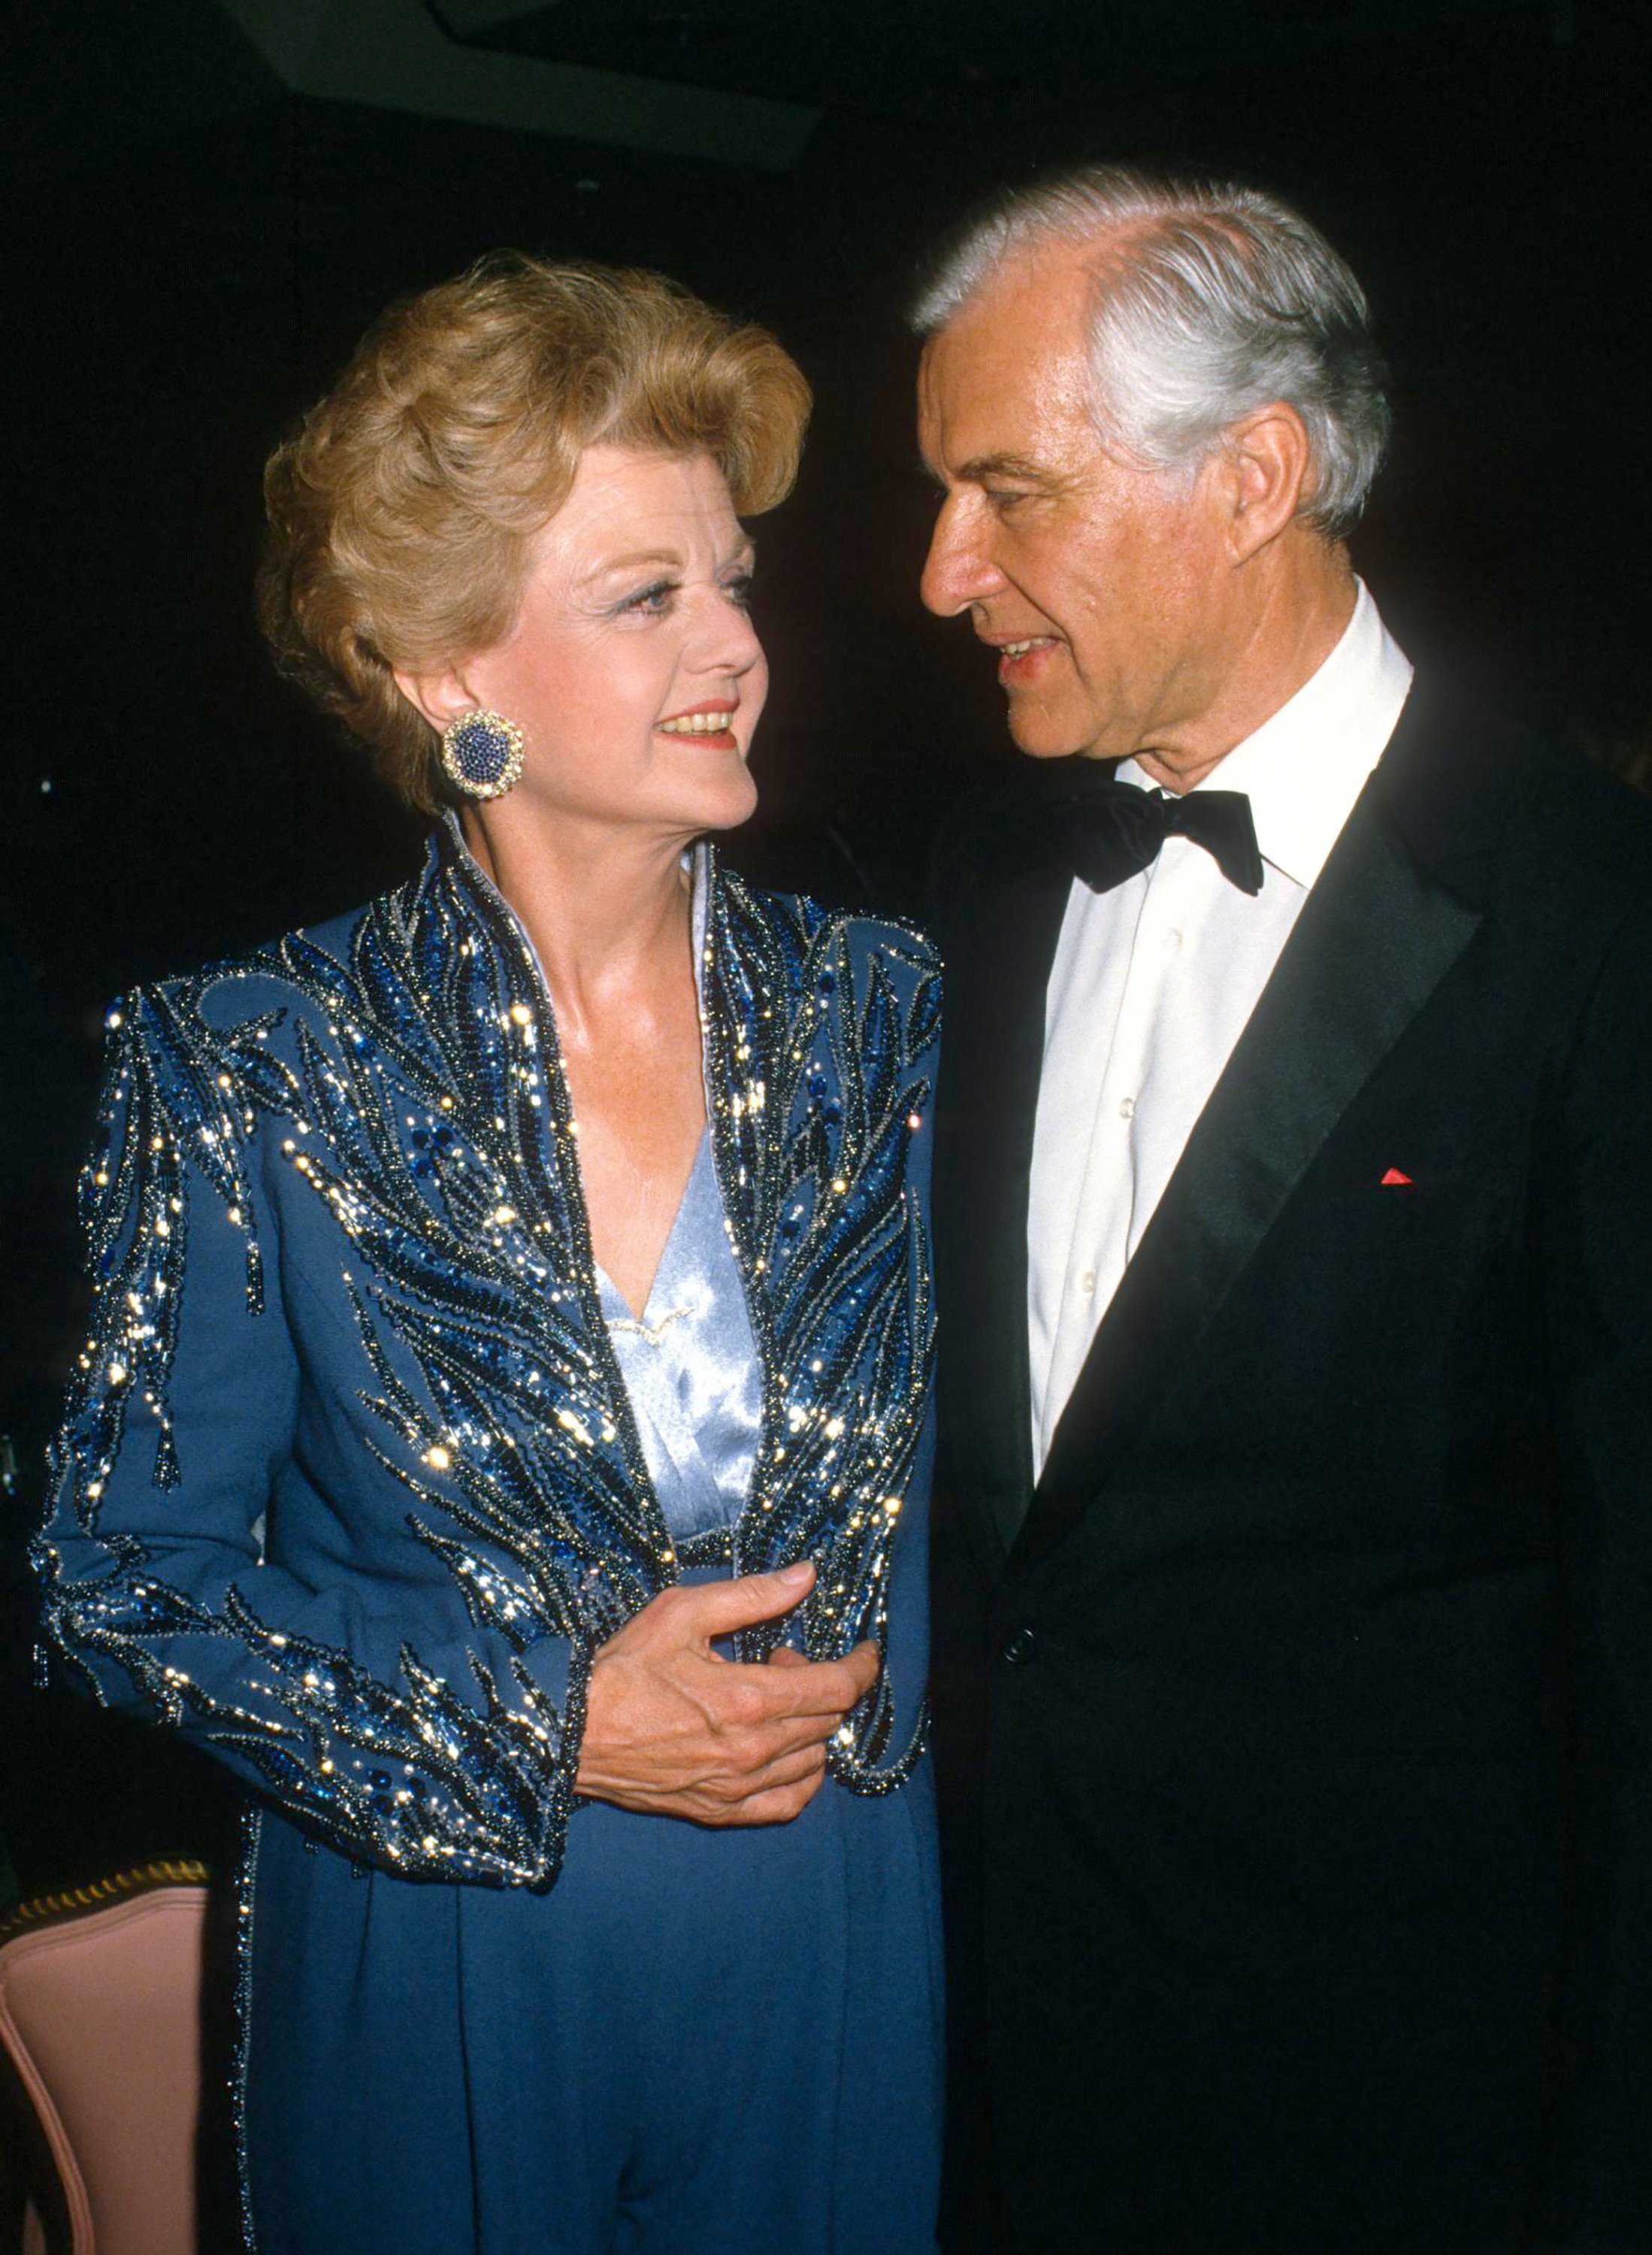 Angela Lansbury and Peter Shaw attend 42nd Annual Tony Awards at the Minskoff TheaterAngela Lansbury and Peter Shaw attend 42nd Annual Tony Awards at the Minskoff TheaterAngela Lansbury and Peter Shaw attend 42nd Annual Tony Awards on June 5, 1988, in New York City | Source: Getty Images